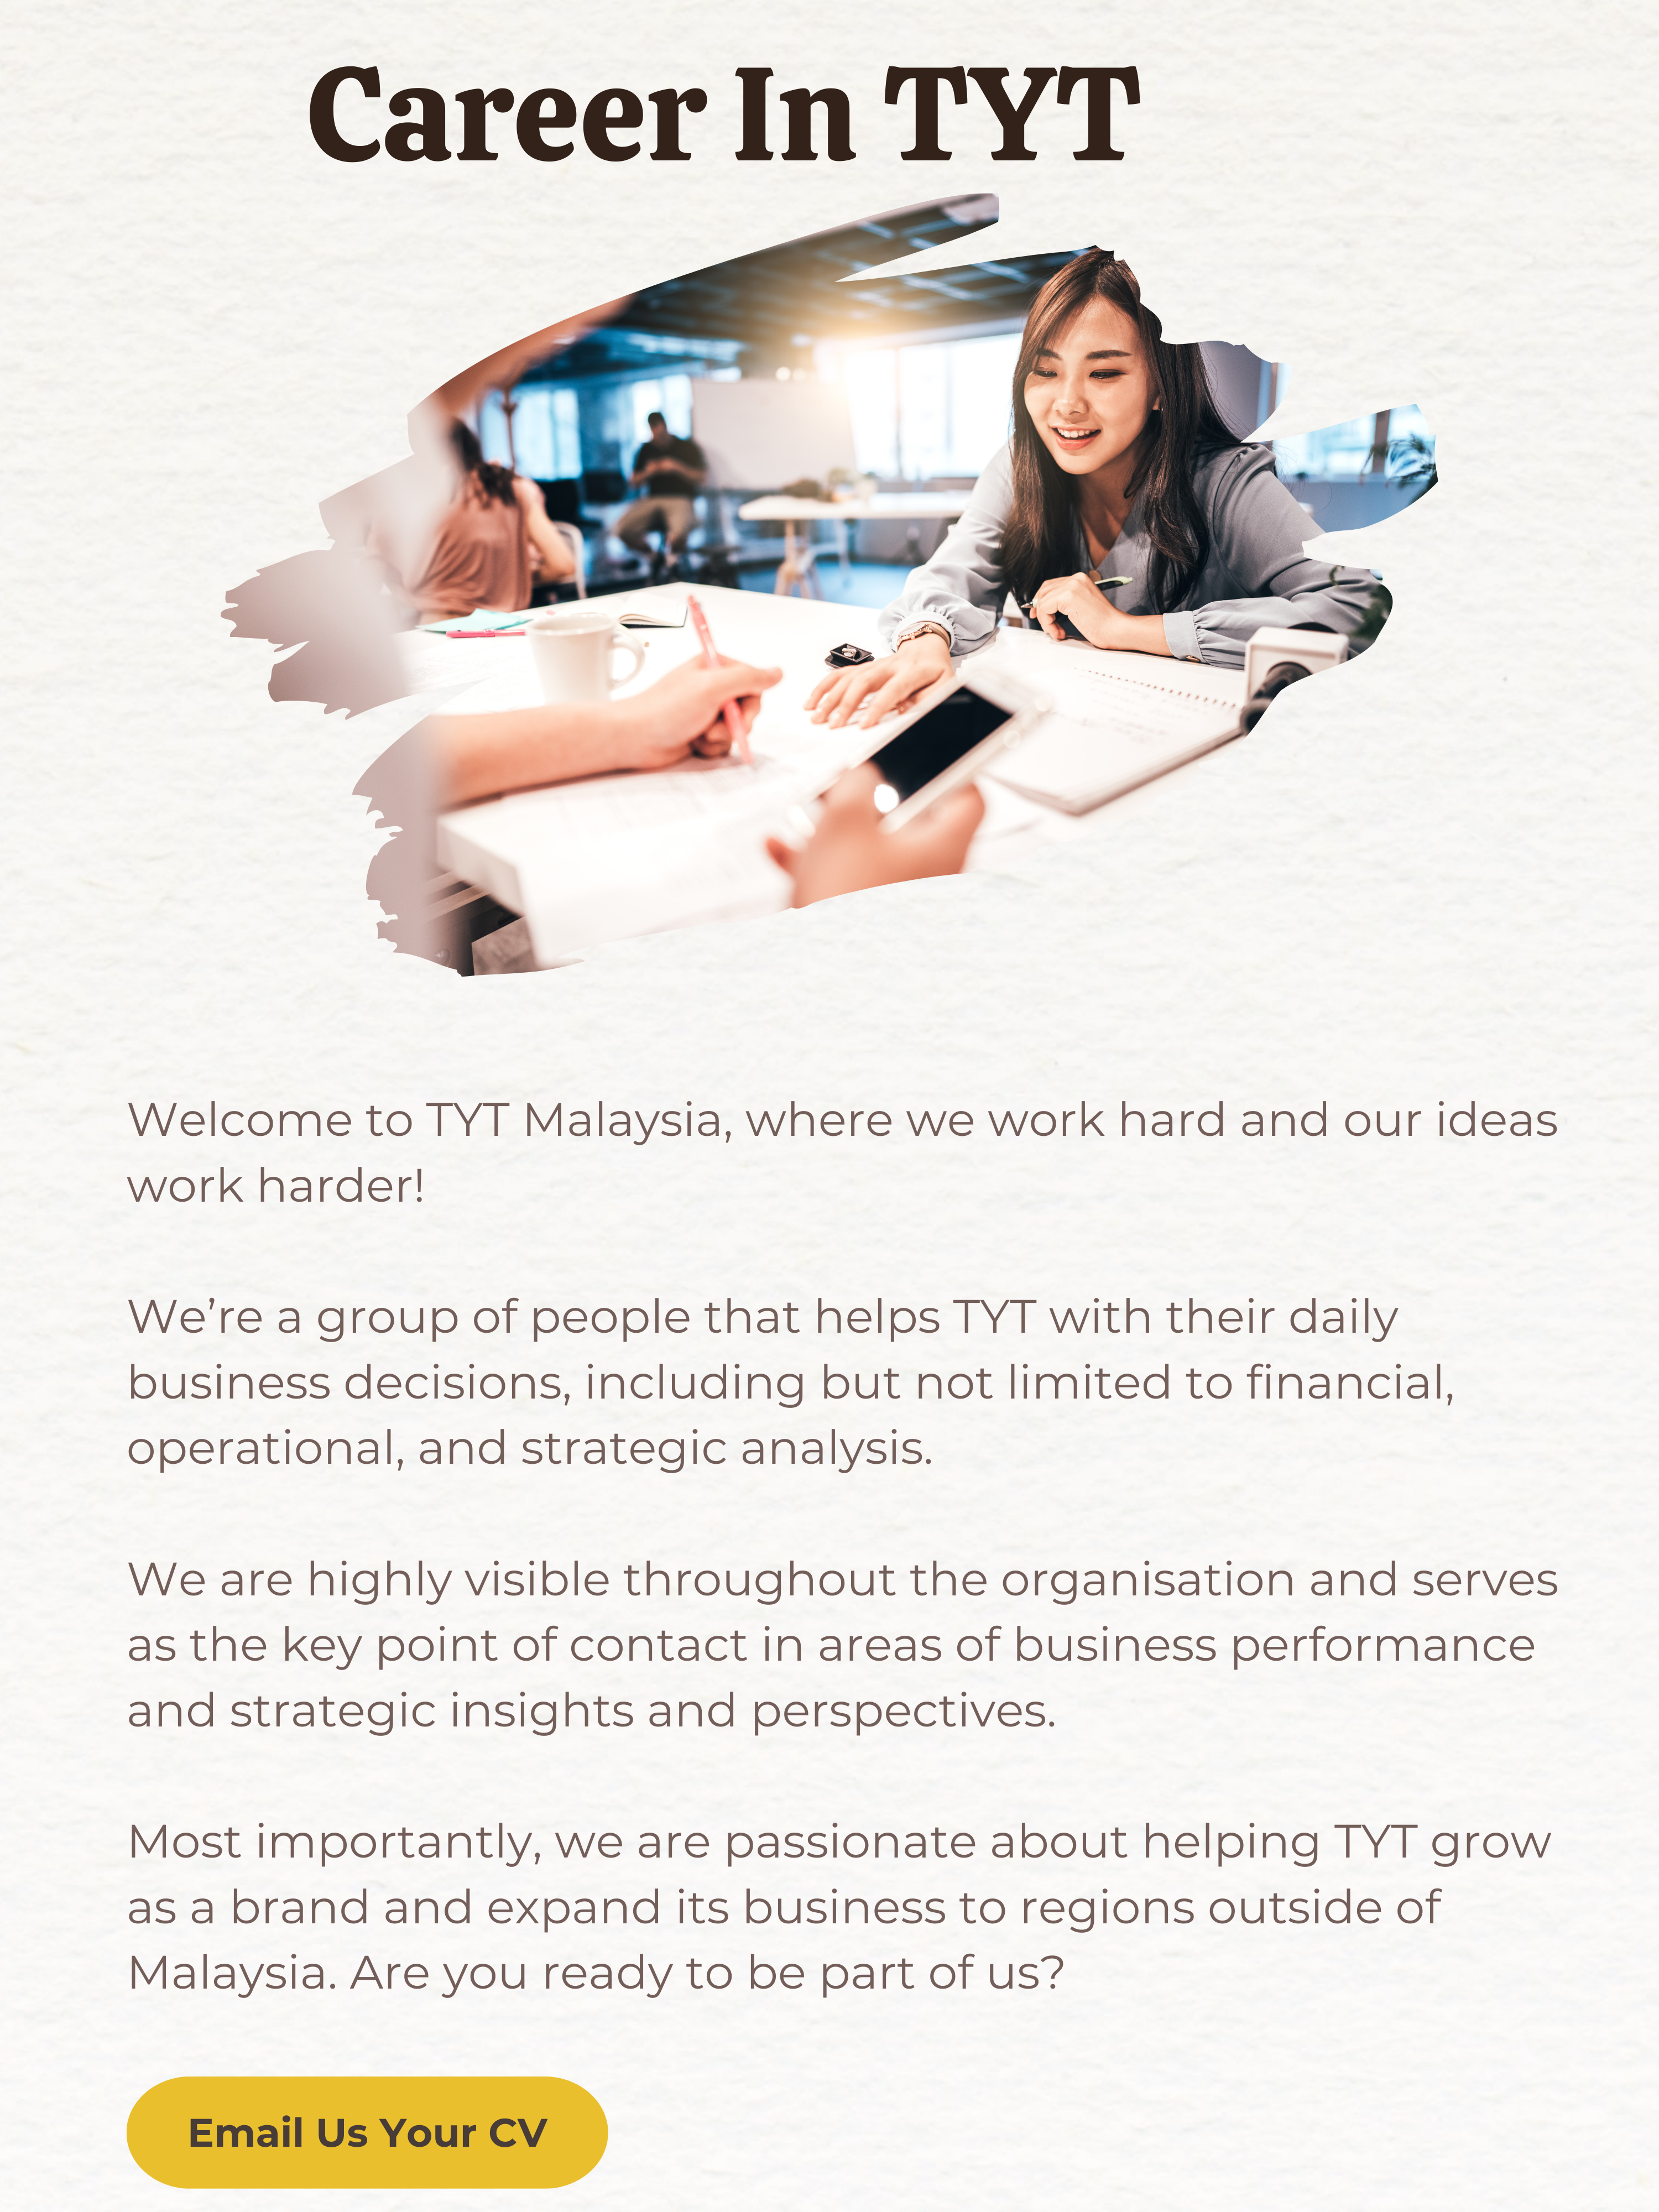 Career in TYT, Welcome to TYT Malaysia where we work hard and our ideas work harder, We’re a group of people that helps TYT with their daily business decisions including but not limited to financial, operational and strategic analysis